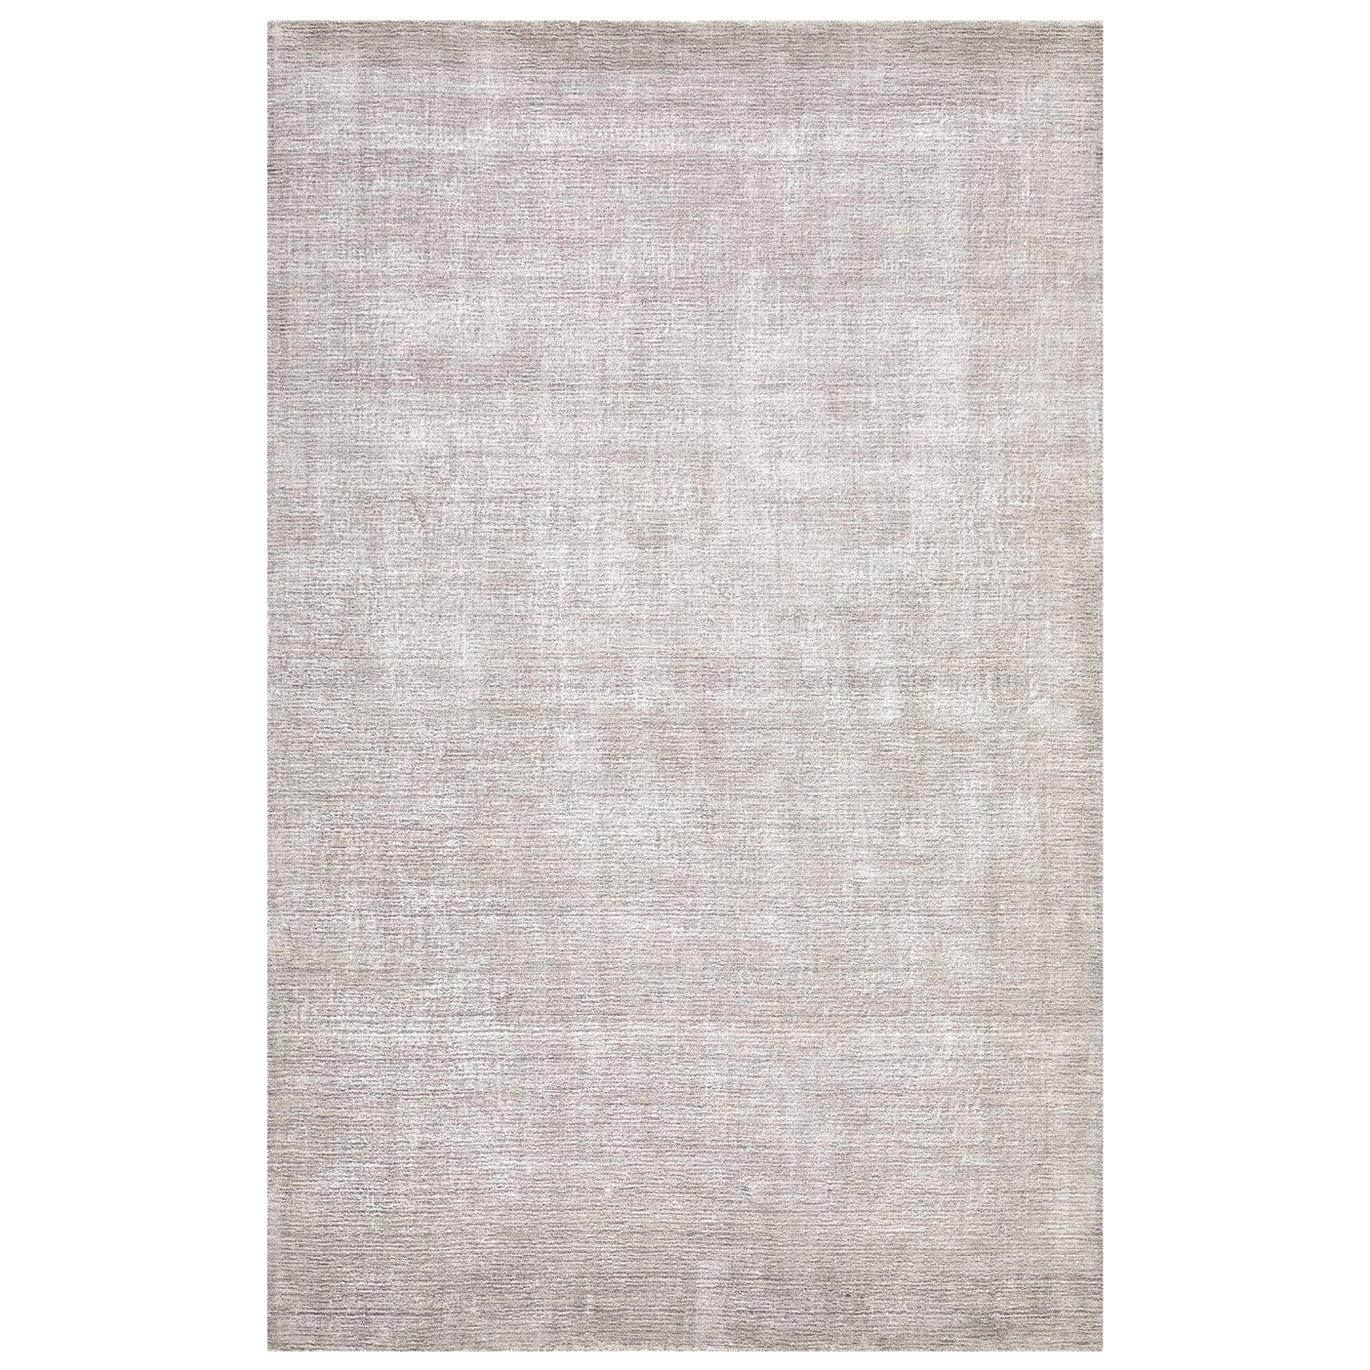 Indian Made Handmade Contemporary Solid Area Rug